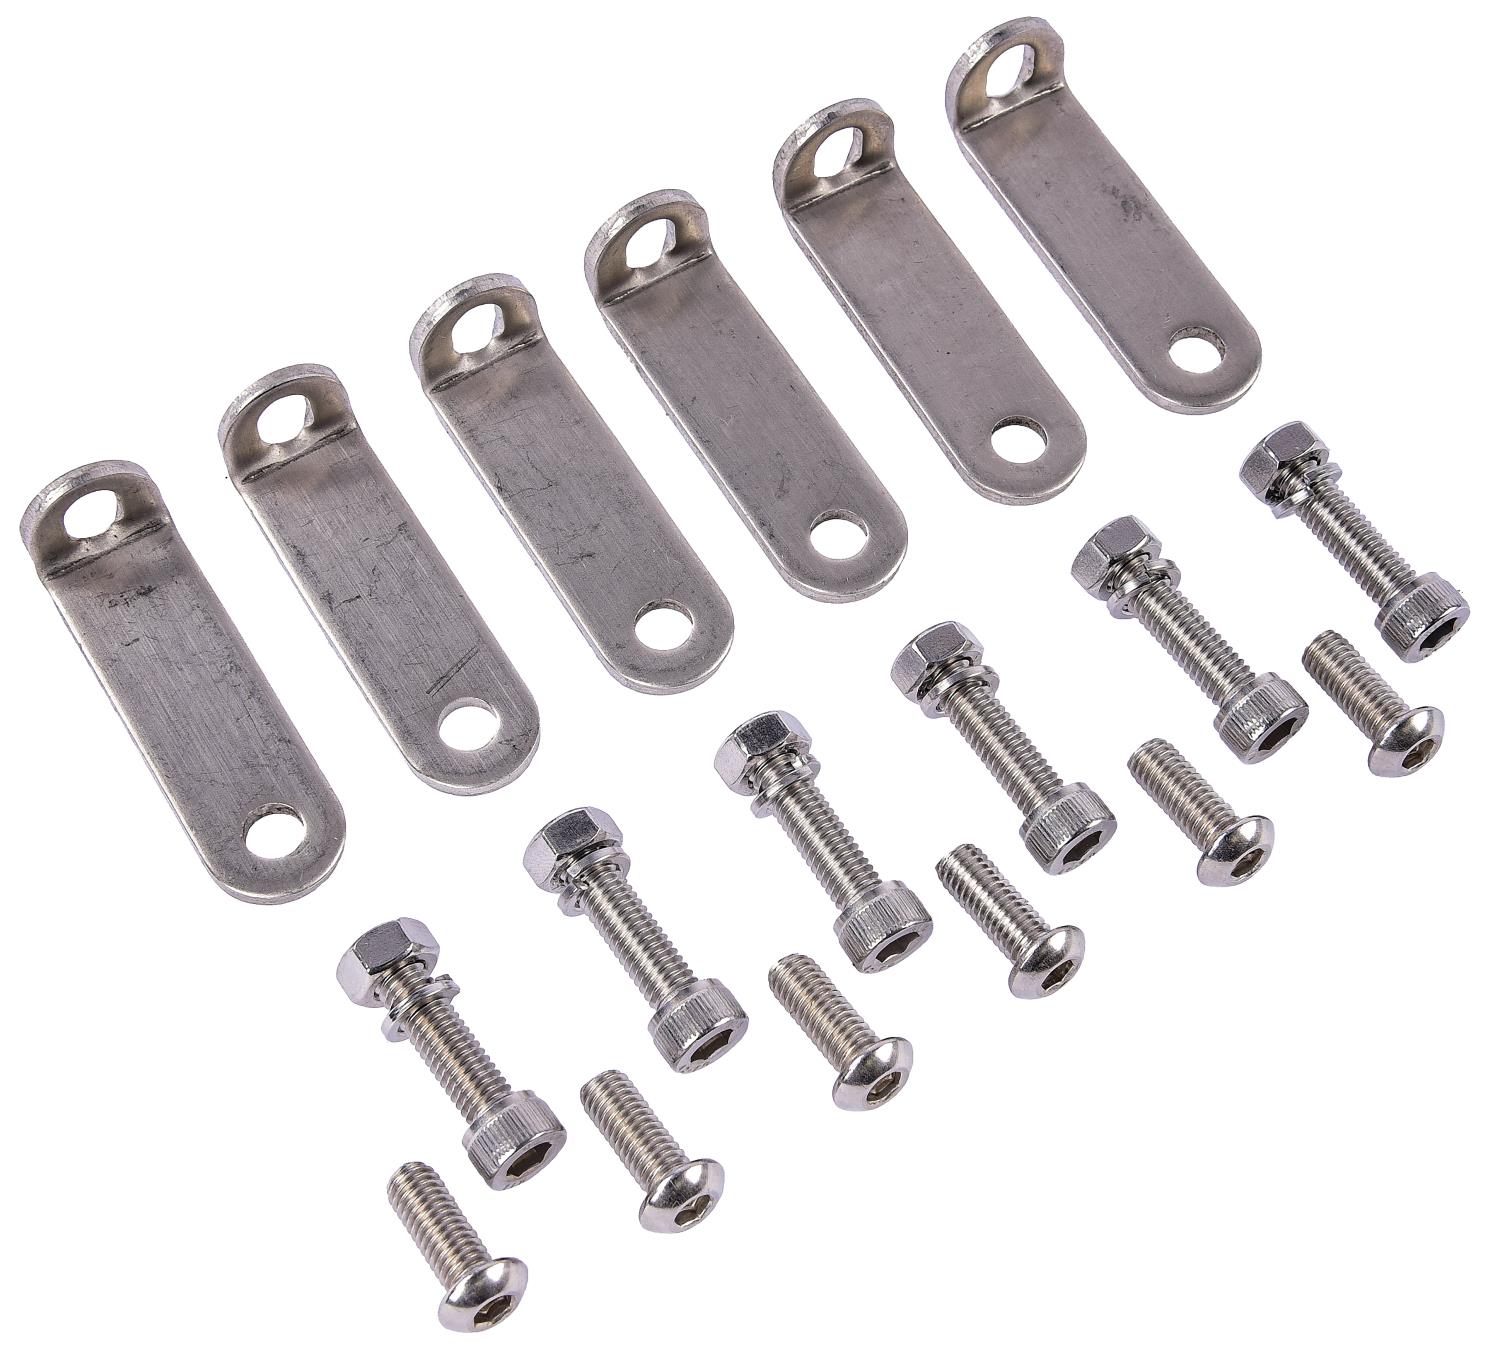 Replacement Fuel Rail Hardware Kit for JEGS Fabricated